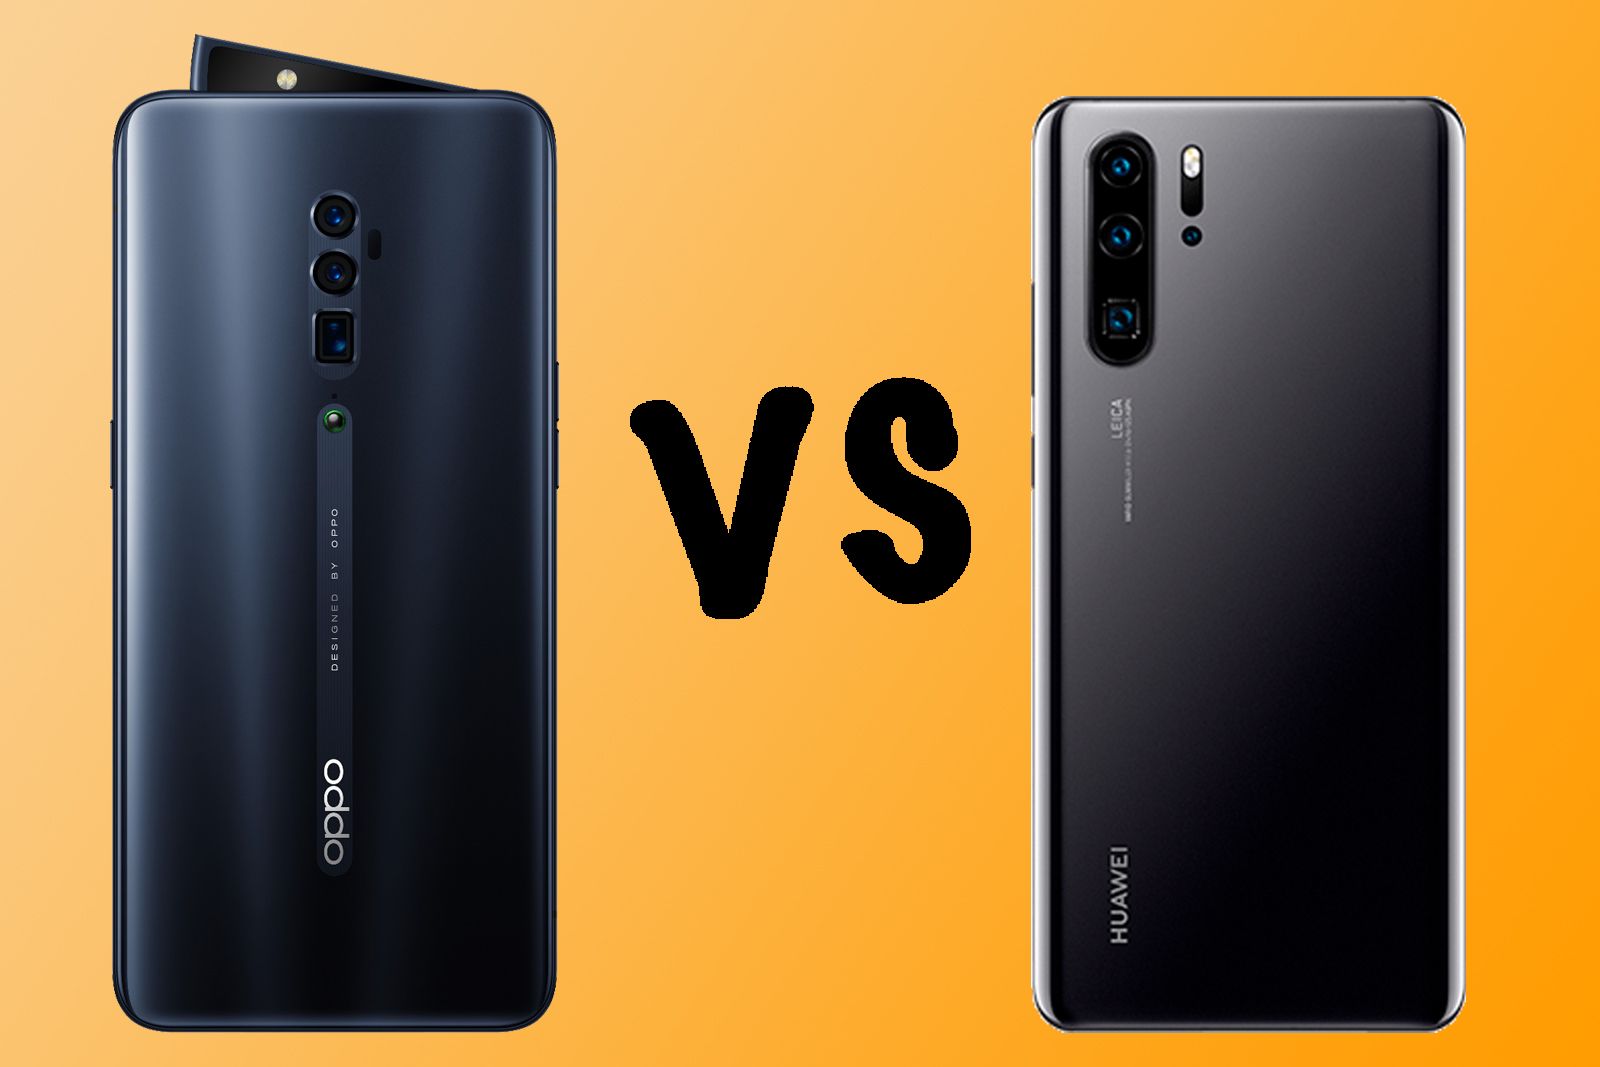 Oppo Reno 10x Zoom vs Huawei P30 Pro Which should you choose image 1